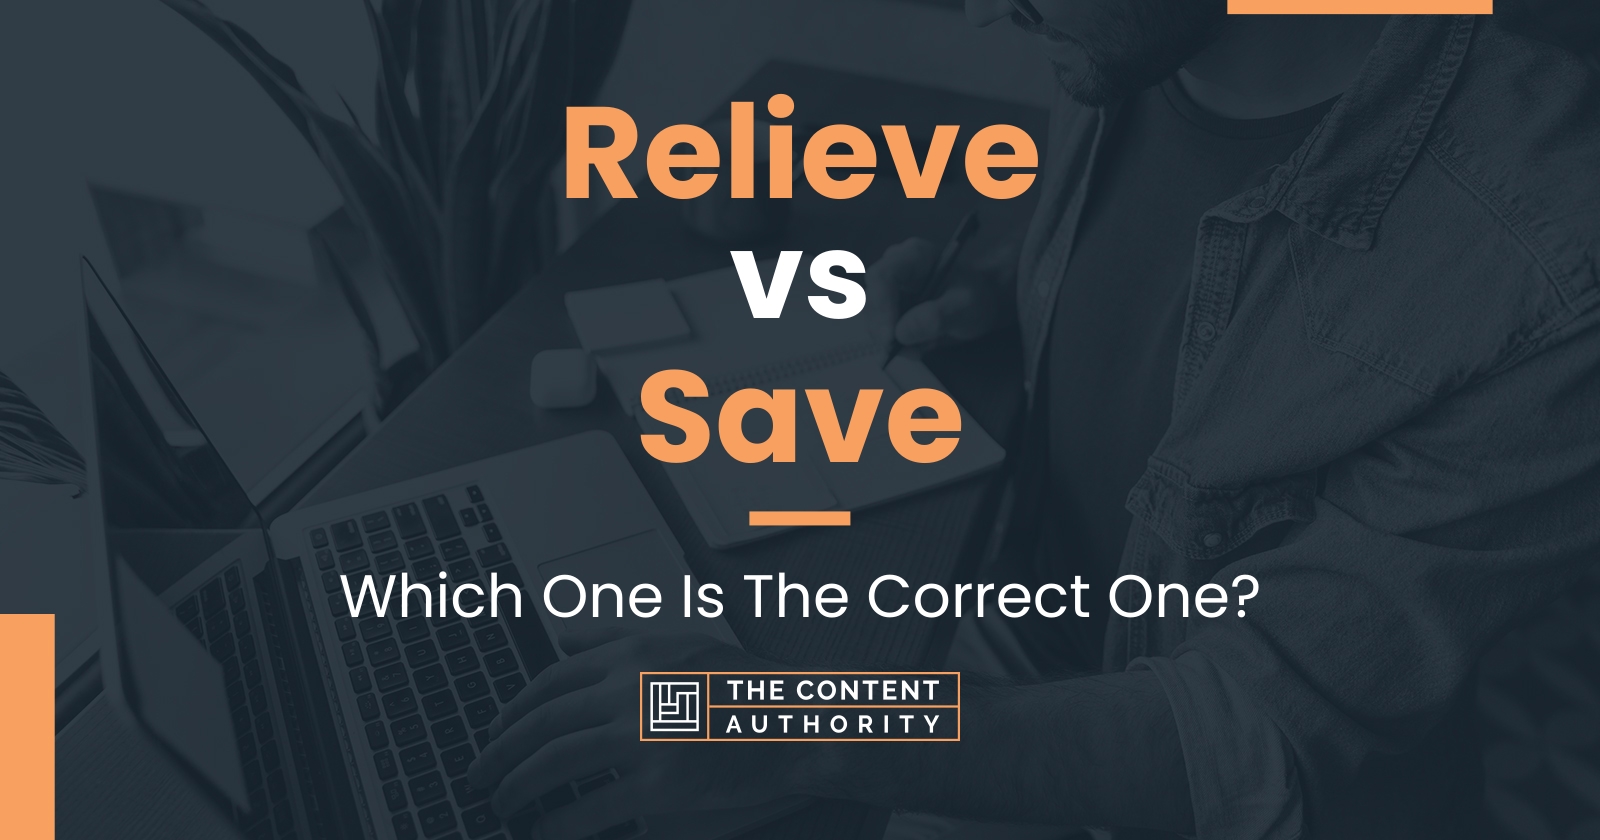 Relieve vs Save: Which One Is The Correct One?